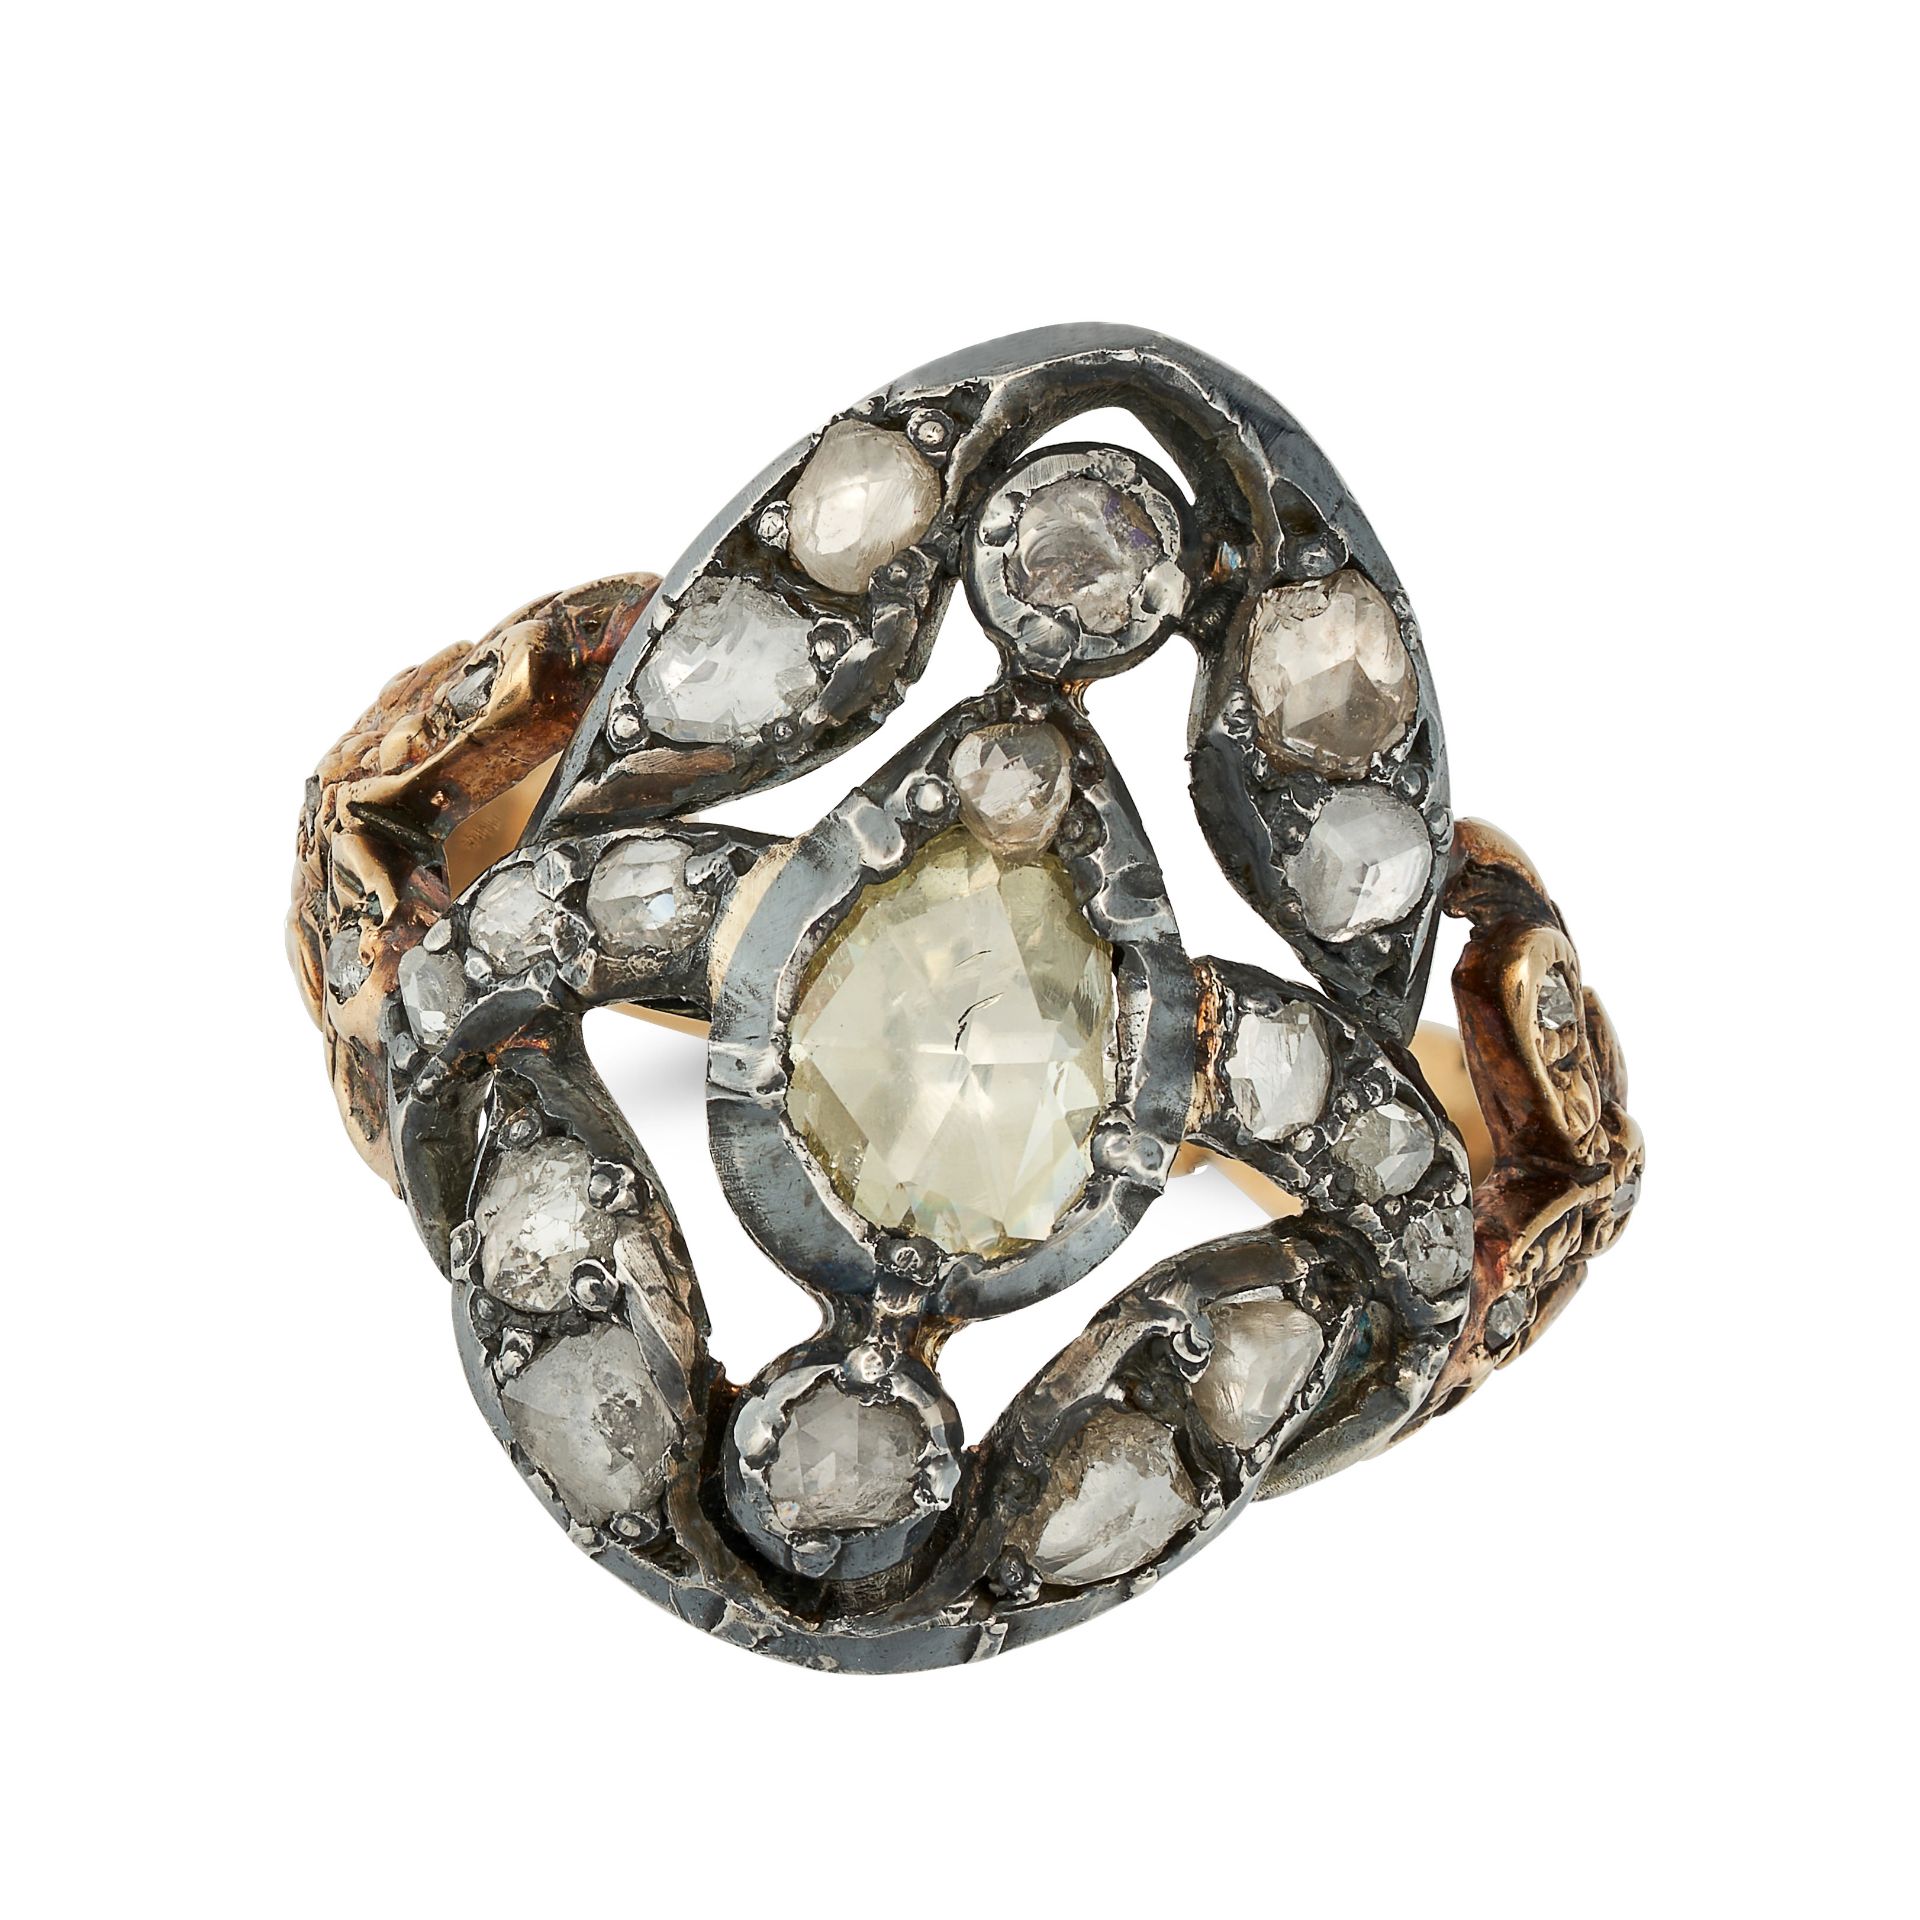 AN ANTIQUE DIAMOND DRESS RING in yellow gold and silver, set with rose cut diamonds, no assay mar...